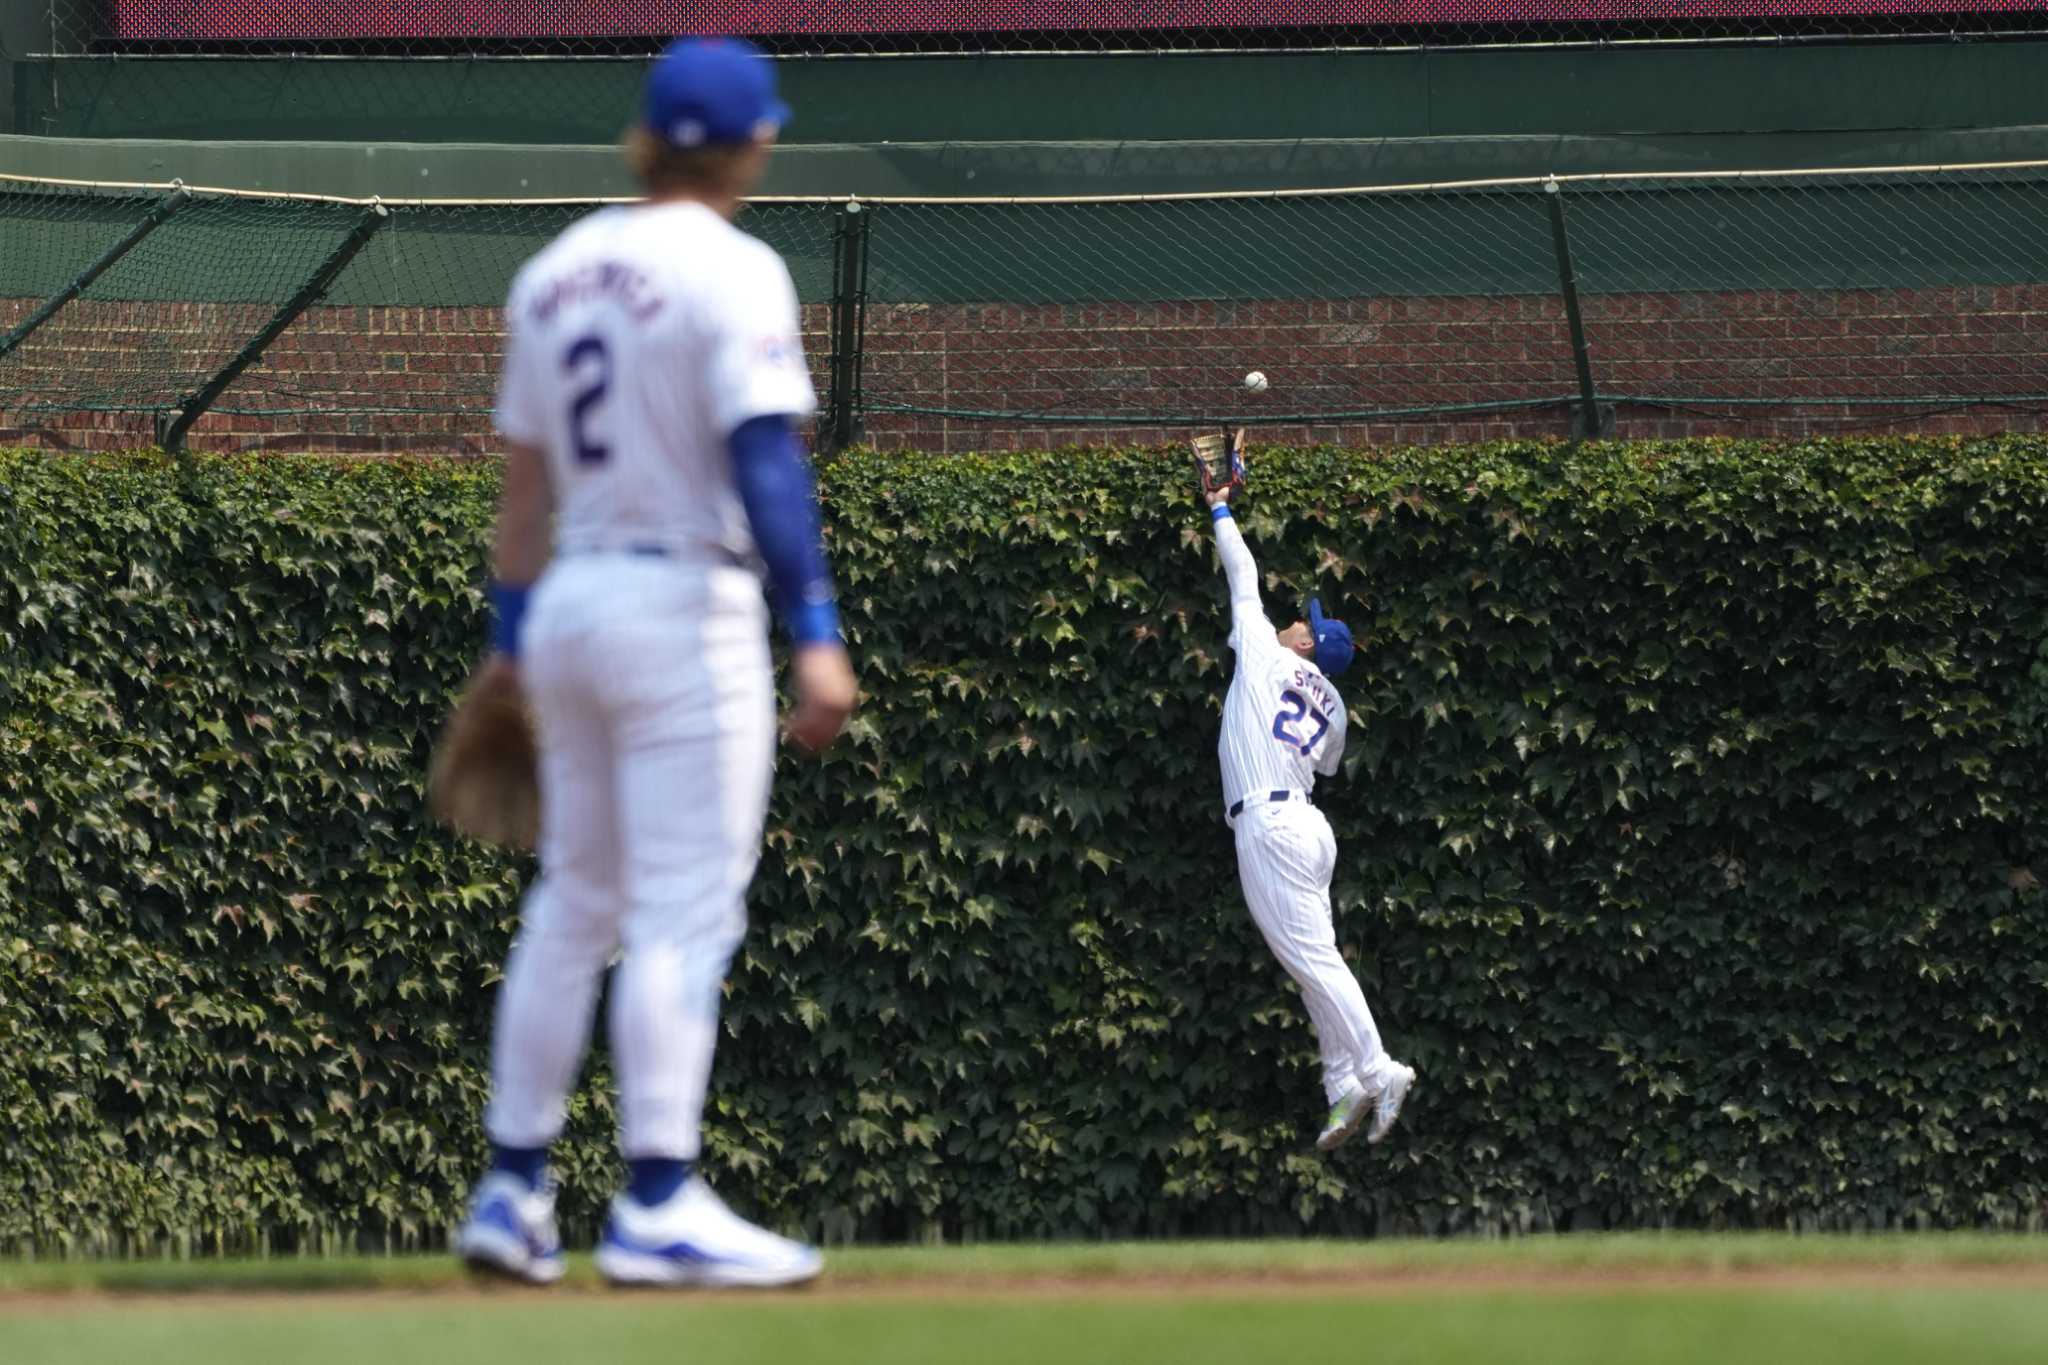 Cubs' eighth-inning fielding mix-up allows Cardinals to rally for 5-4 win